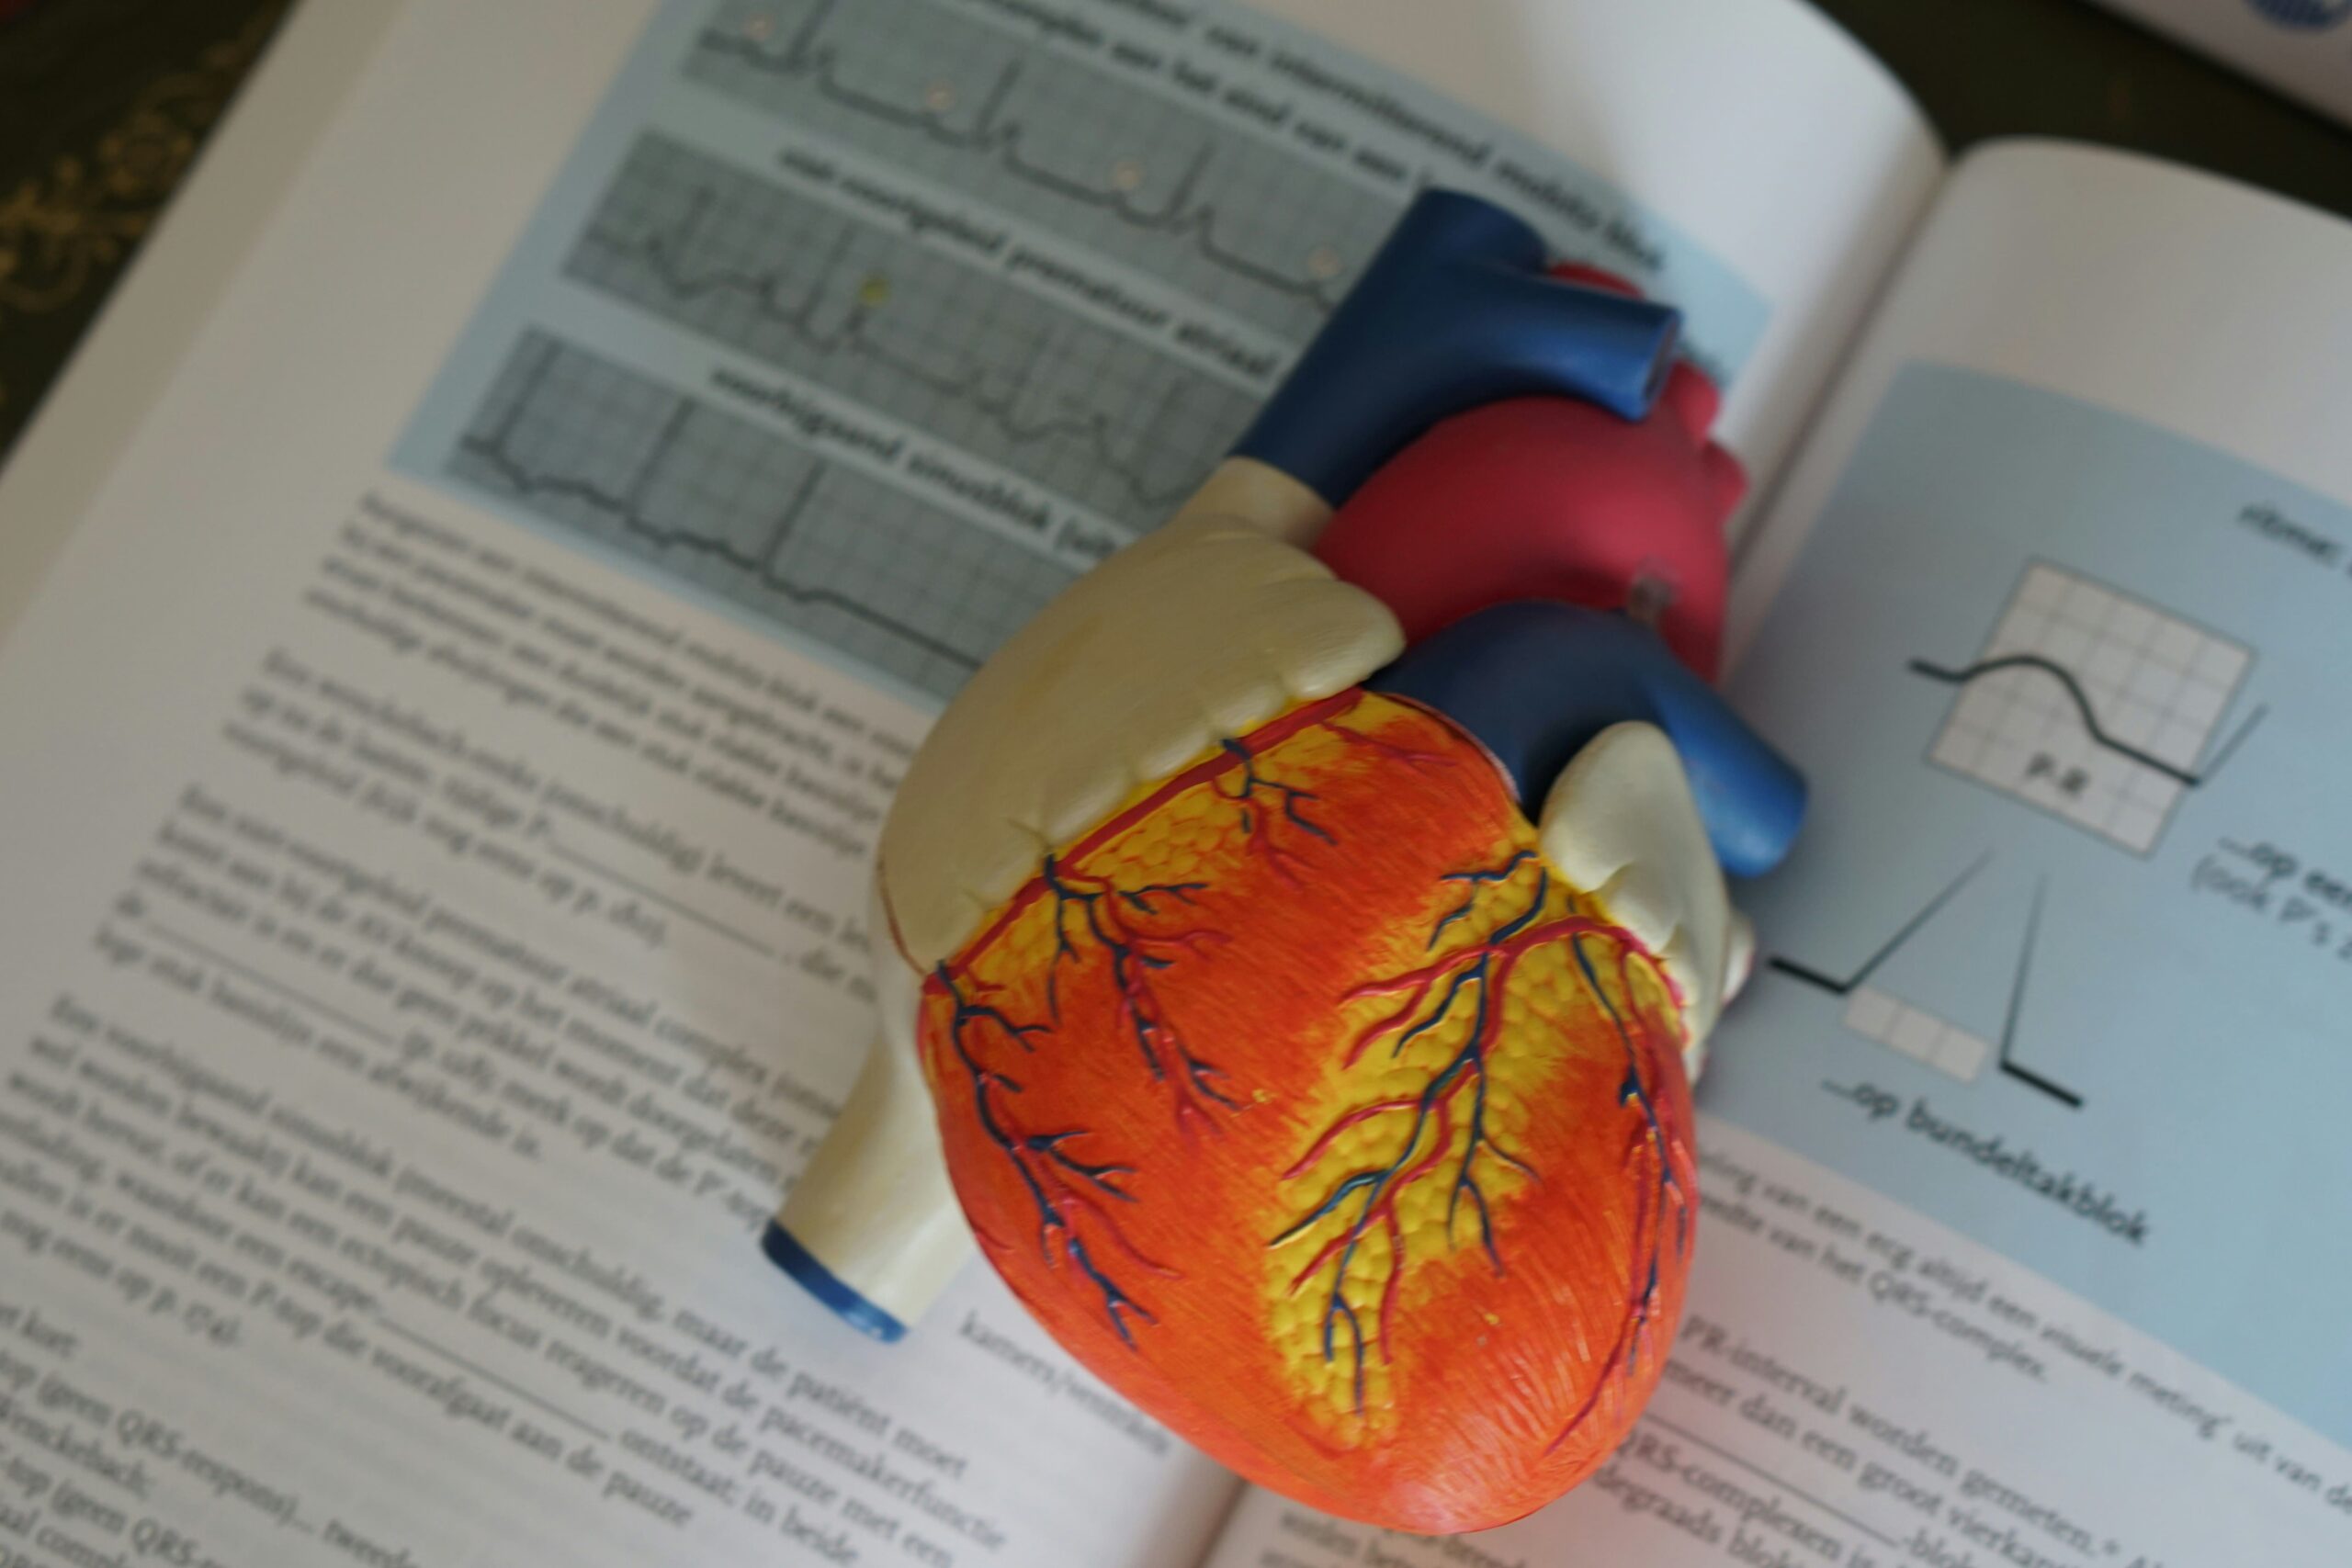 Heart model sitting on top of text book - illustrative image of heart health